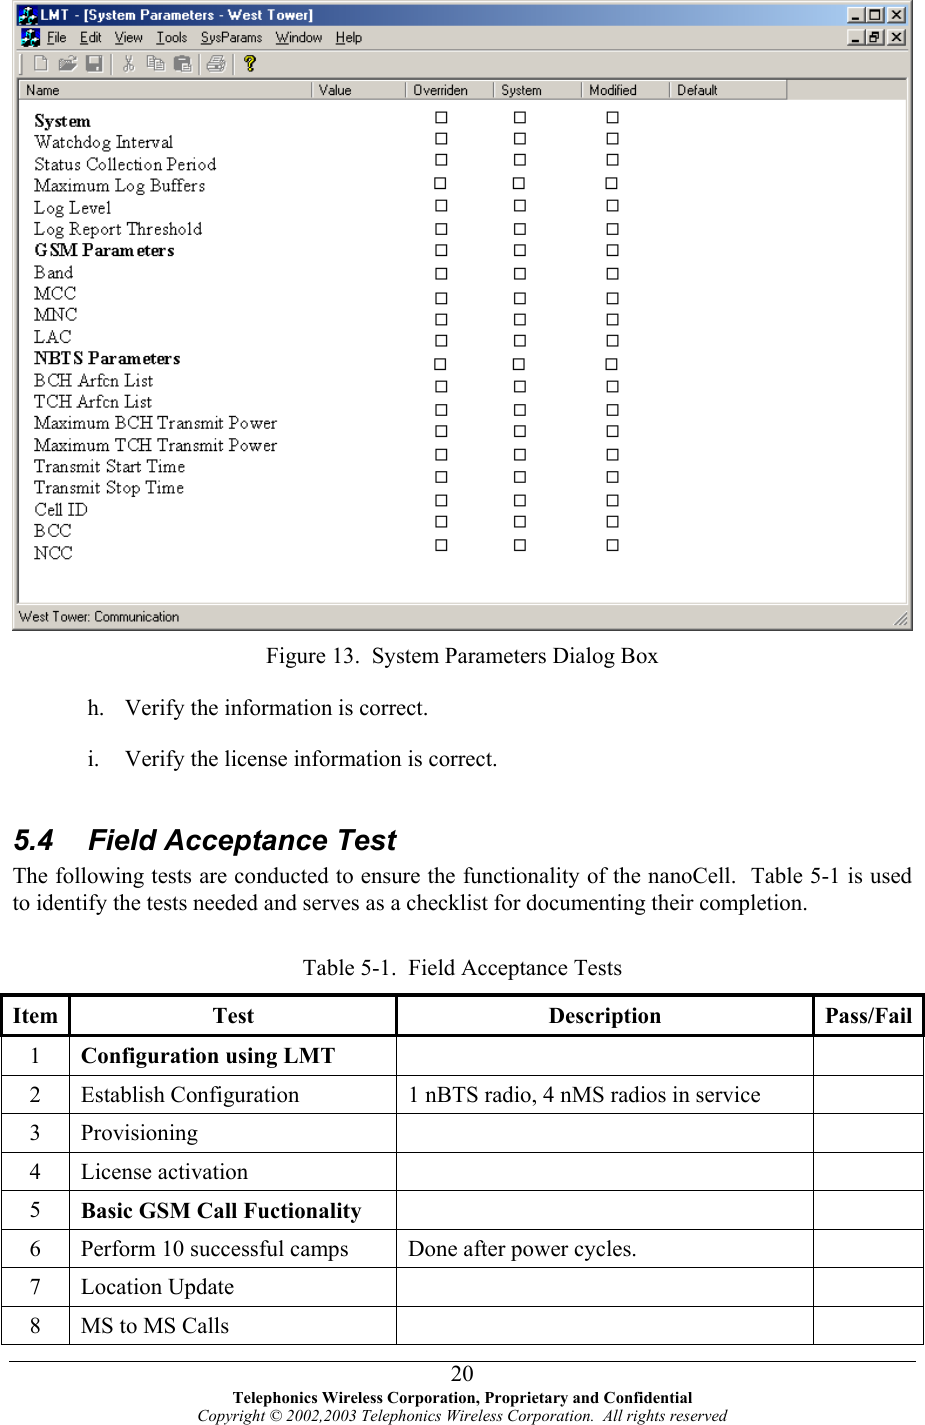   Figure 13.  System Parameters Dialog Box h. i. Verify the information is correct. Verify the license information is correct.   5.4  Field Acceptance Test The following tests are conducted to ensure the functionality of the nanoCell.  Table 5-1 is used to identify the tests needed and serves as a checklist for documenting their completion.  Table 5-1.  Field Acceptance Tests Item Test  Description  Pass/Fail1  Configuration using LMT    2  Establish Configuration  1 nBTS radio, 4 nMS radios in service   3 Provisioning     4 License activation     5  Basic GSM Call Fuctionality    6  Perform 10 successful camps  Done after power cycles.   7 Location Update     8  MS to MS Calls      Telephonics Wireless Corporation, Proprietary and Confidential Copyright © 2002,2003 Telephonics Wireless Corporation.  All rights reserved 20